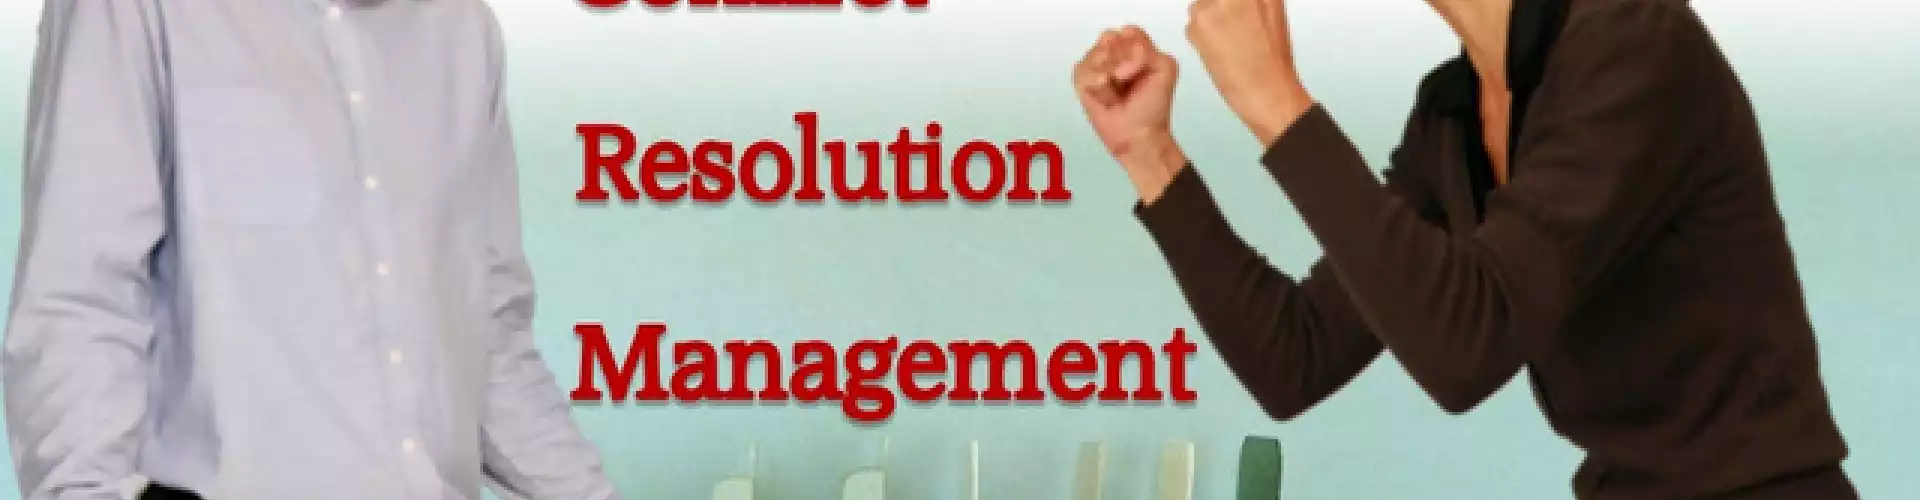 Conflict - Resolution Management - Part 2 of 2